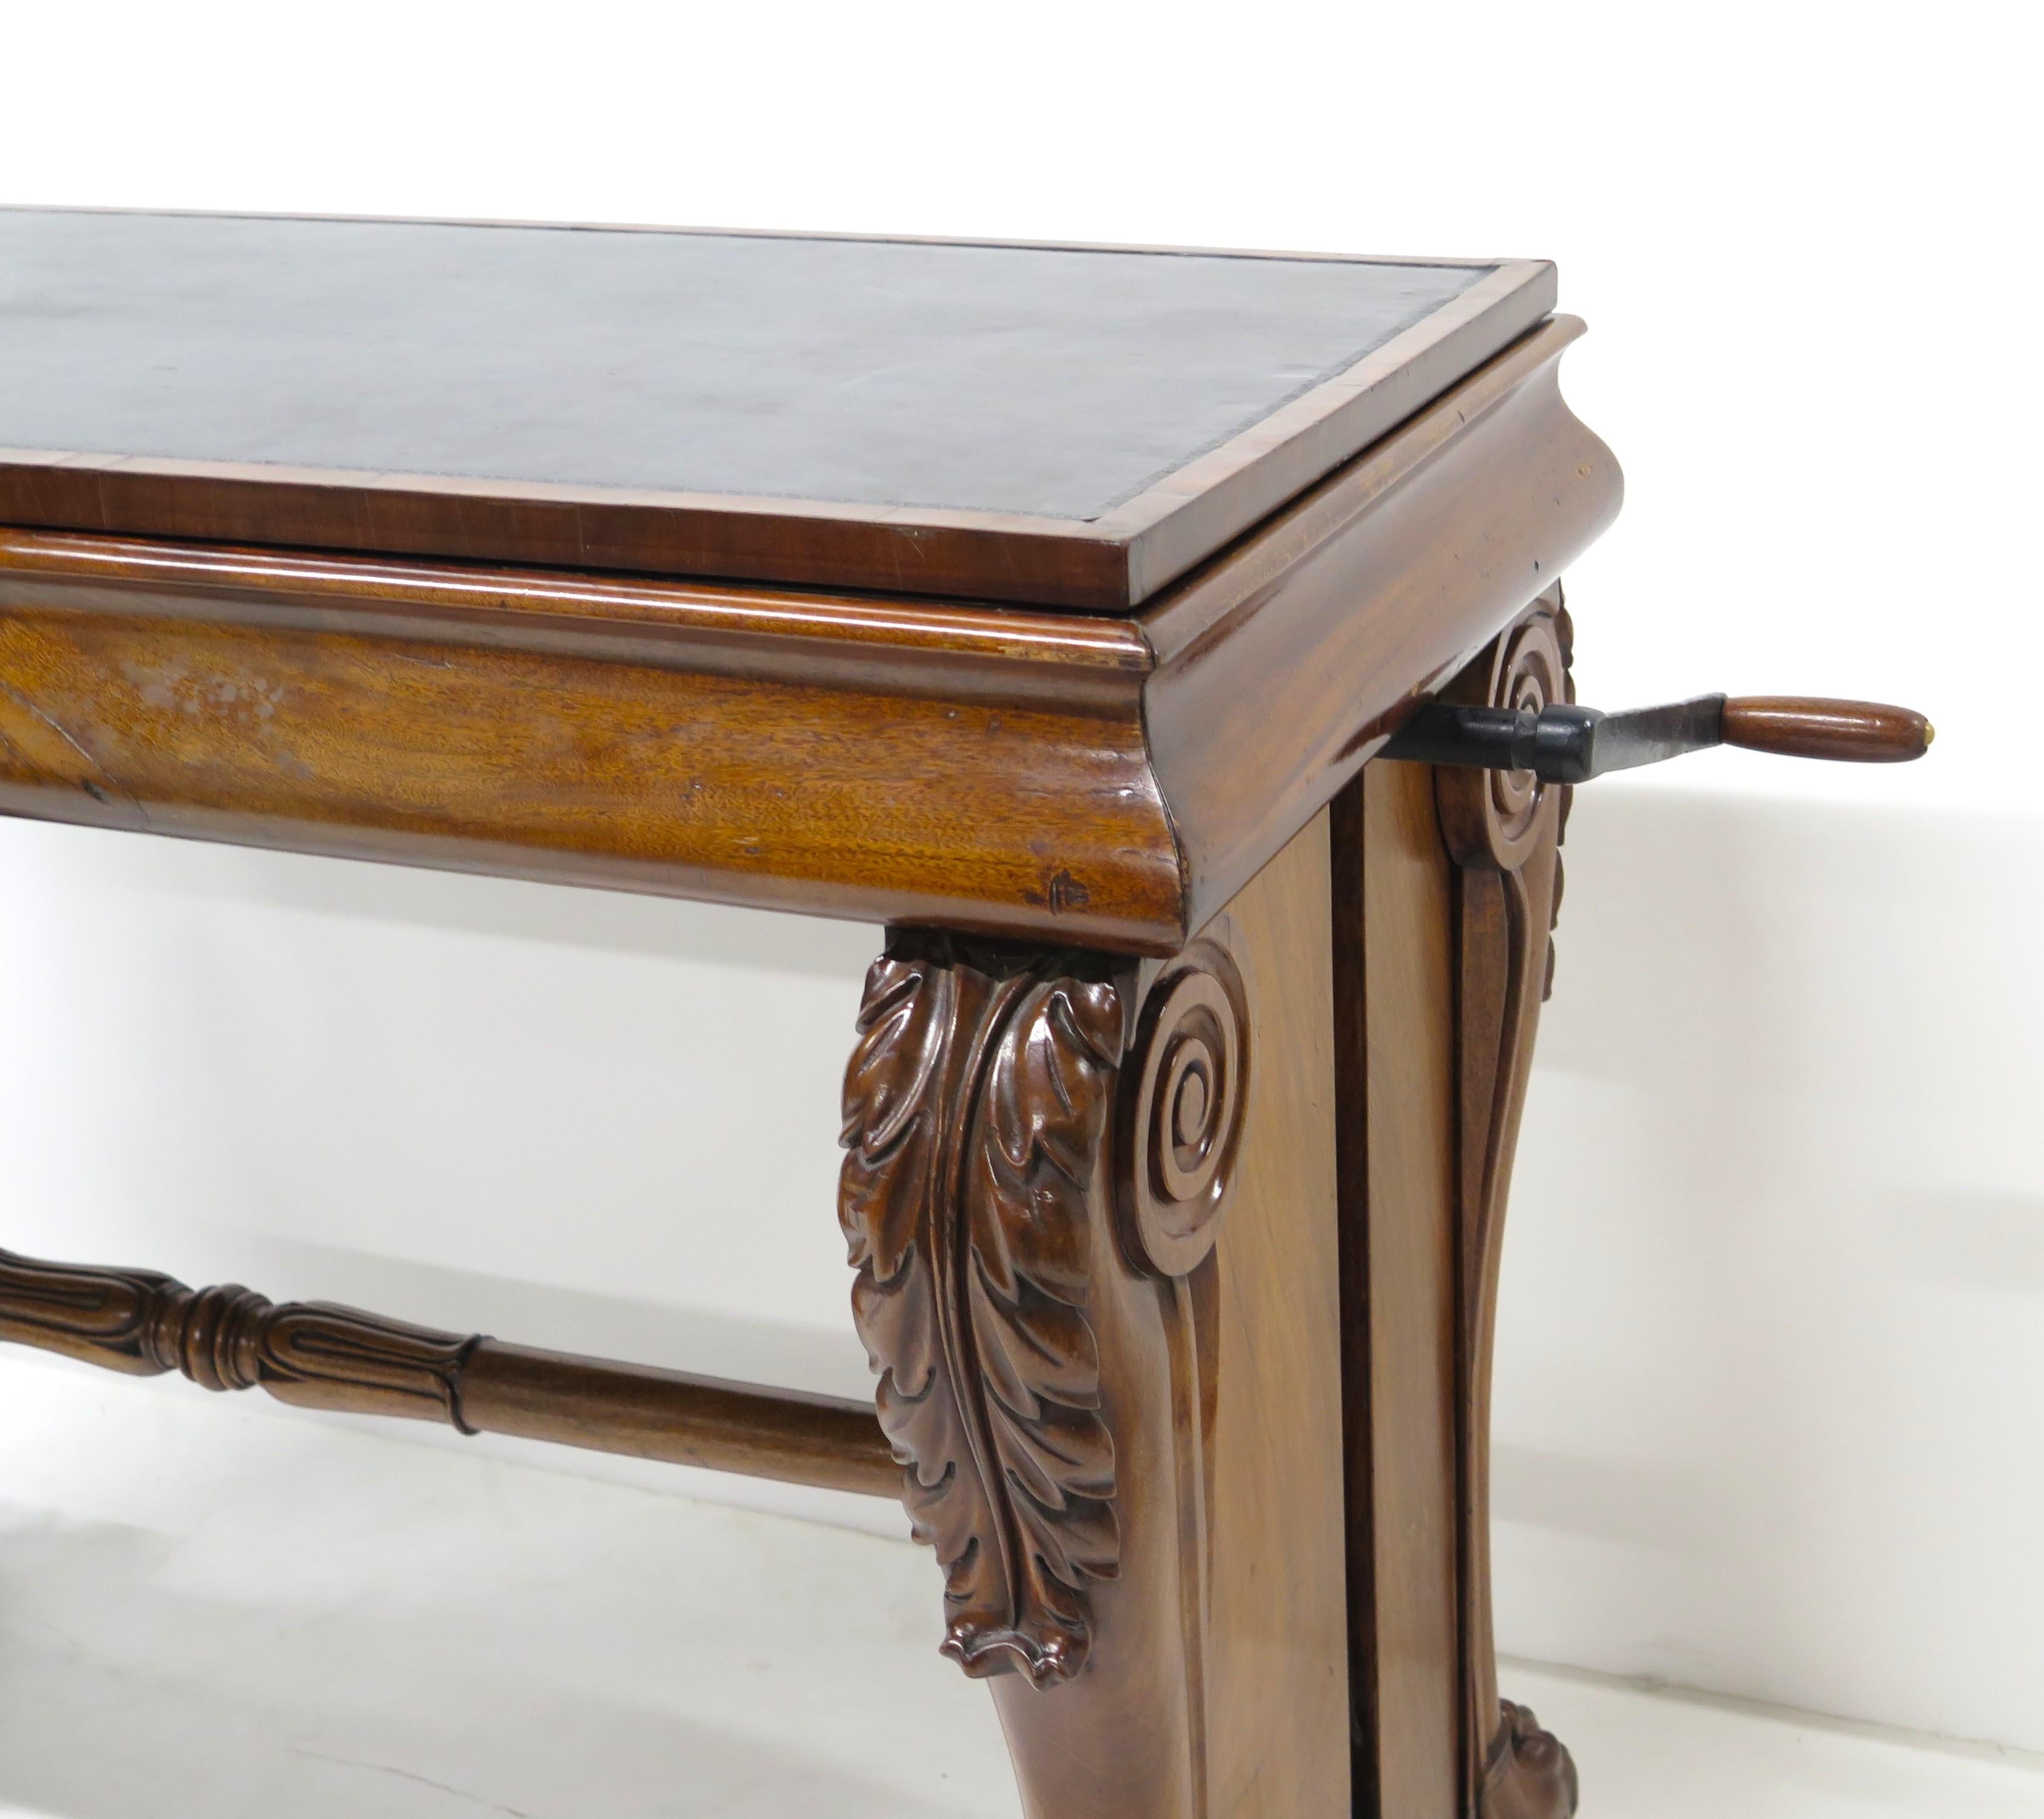 William IV Mahogany Stretcher Based Library Table with Black Leather Top In Good Condition For Sale In Dallas, TX